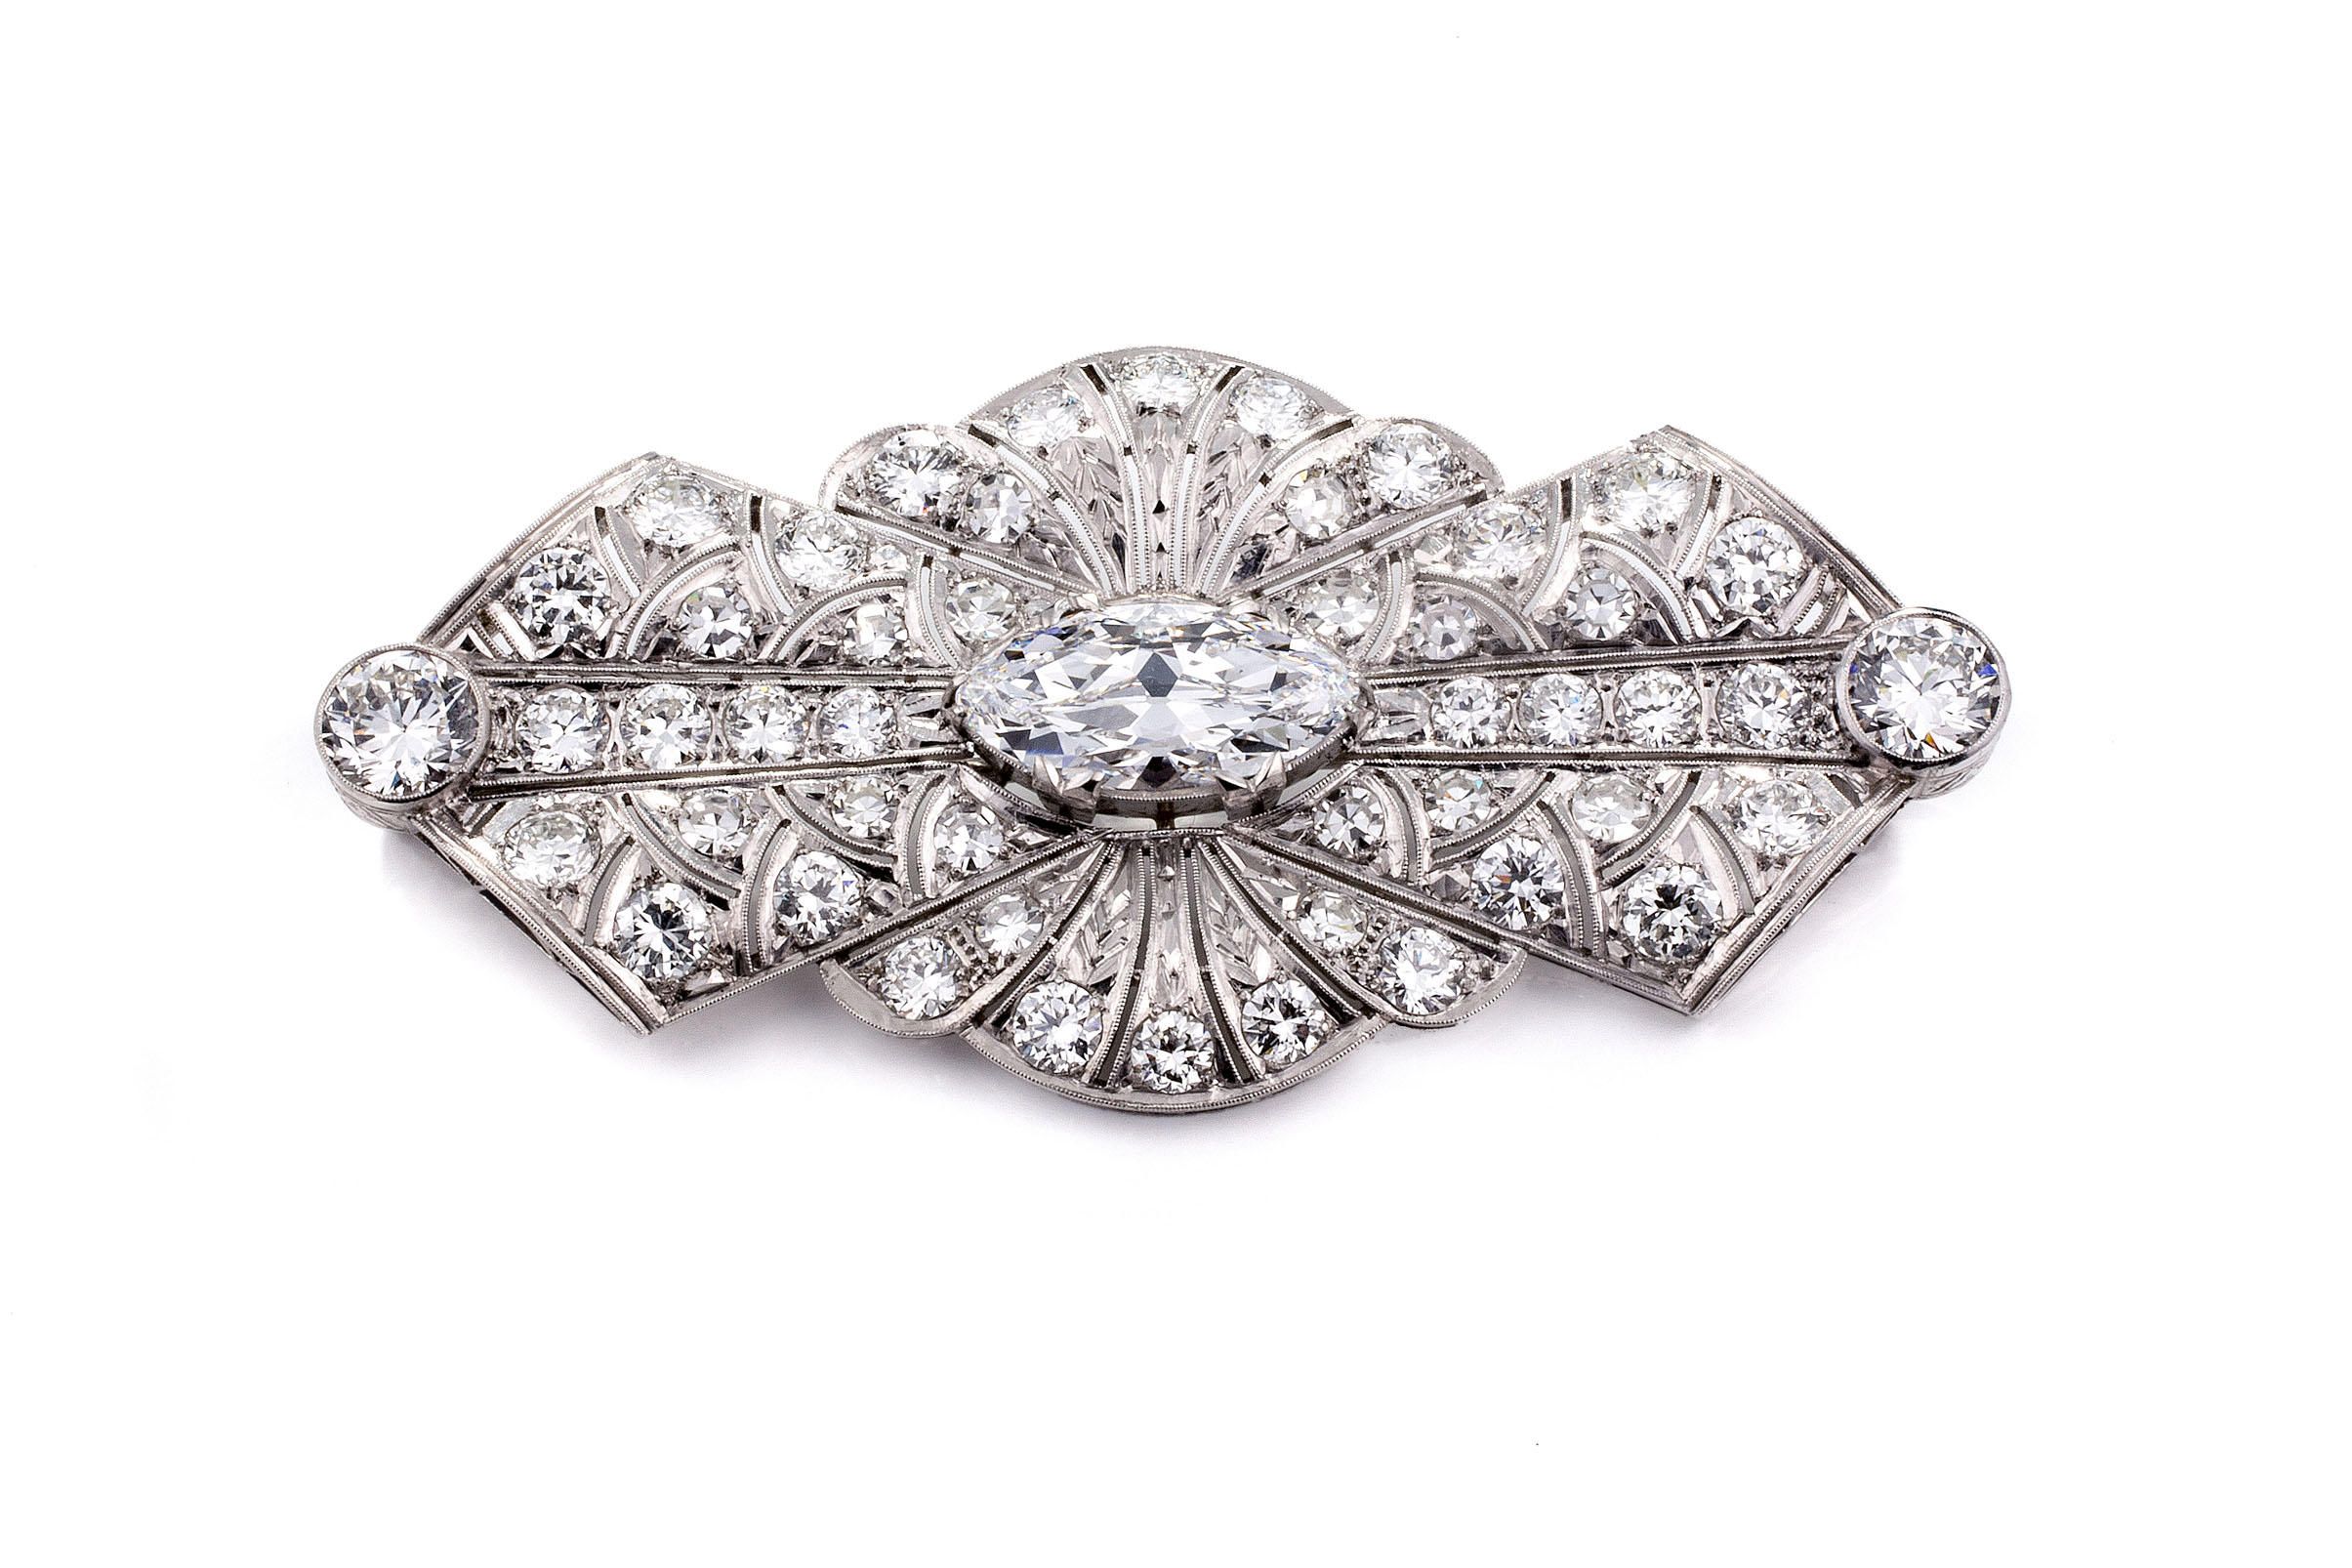 Marquise Diamond Bow Brooch with 9 Carats of Diamonds - Brooches ...